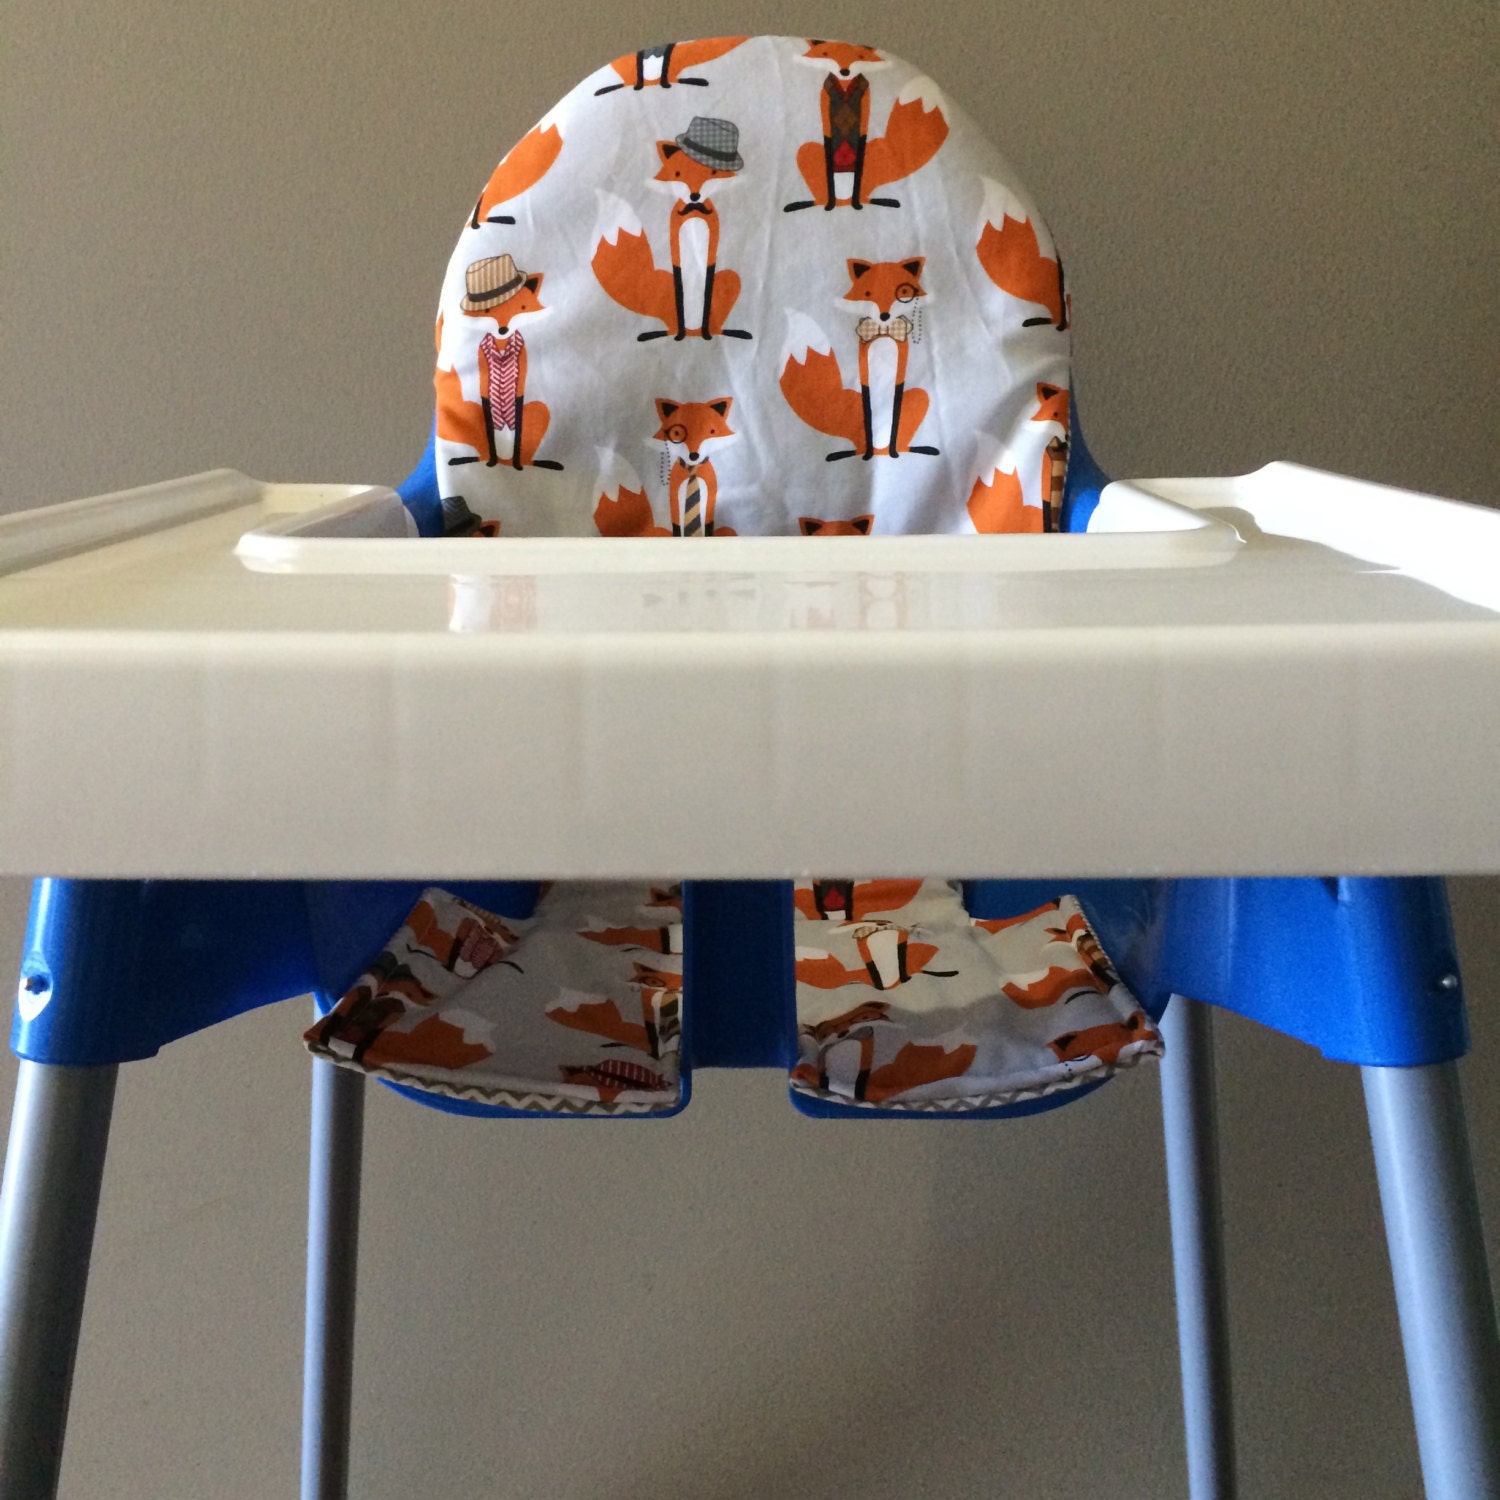 Ikea Antilop high chair cover. Cotton. Orange foxes and grey